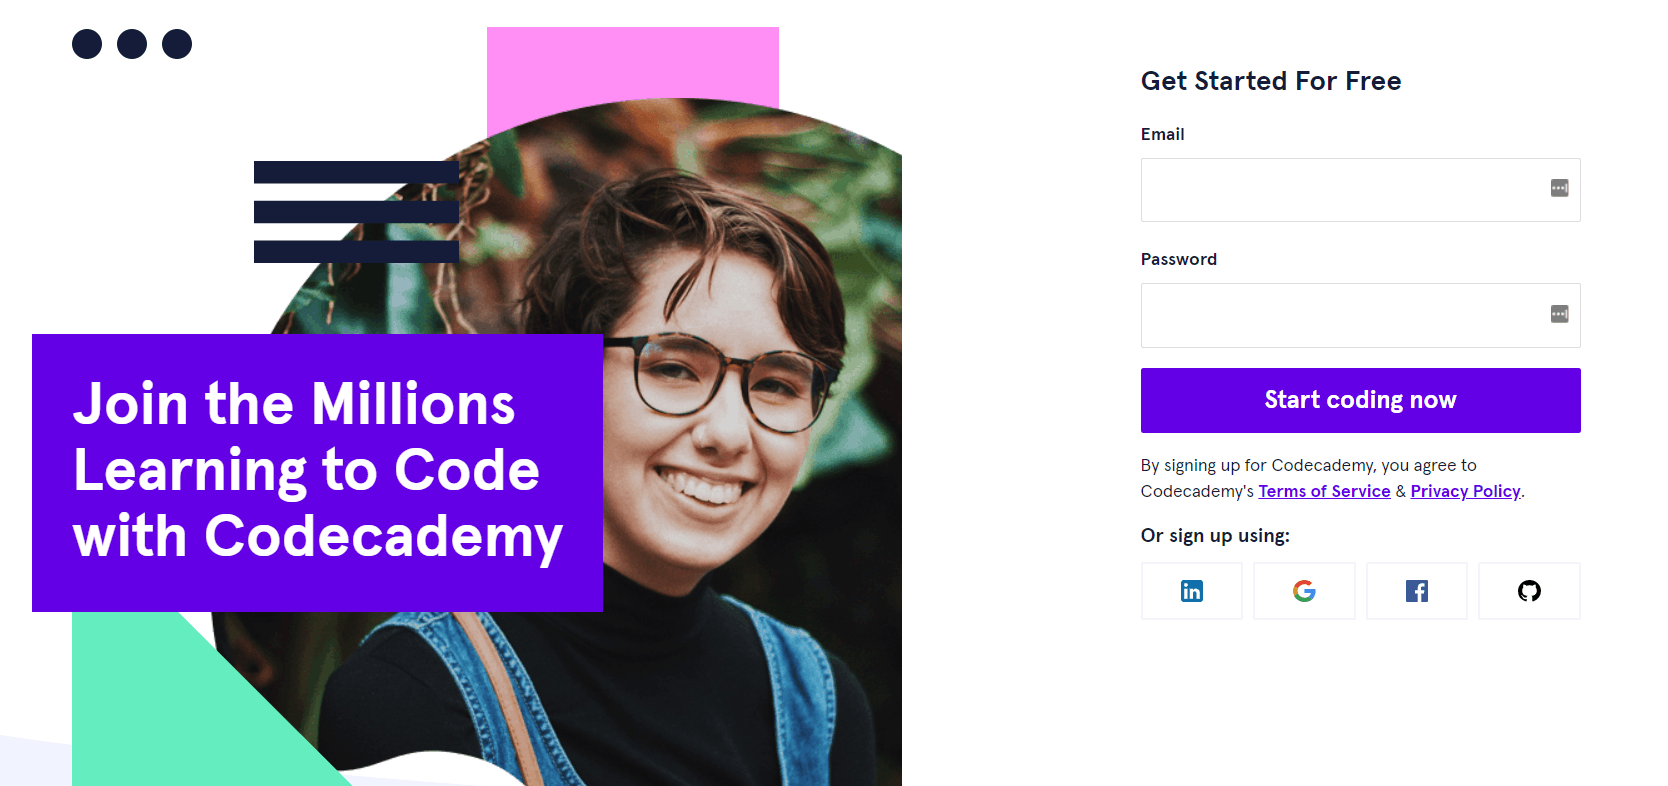 Codecademy homepage - Join the millions learning to code for free 